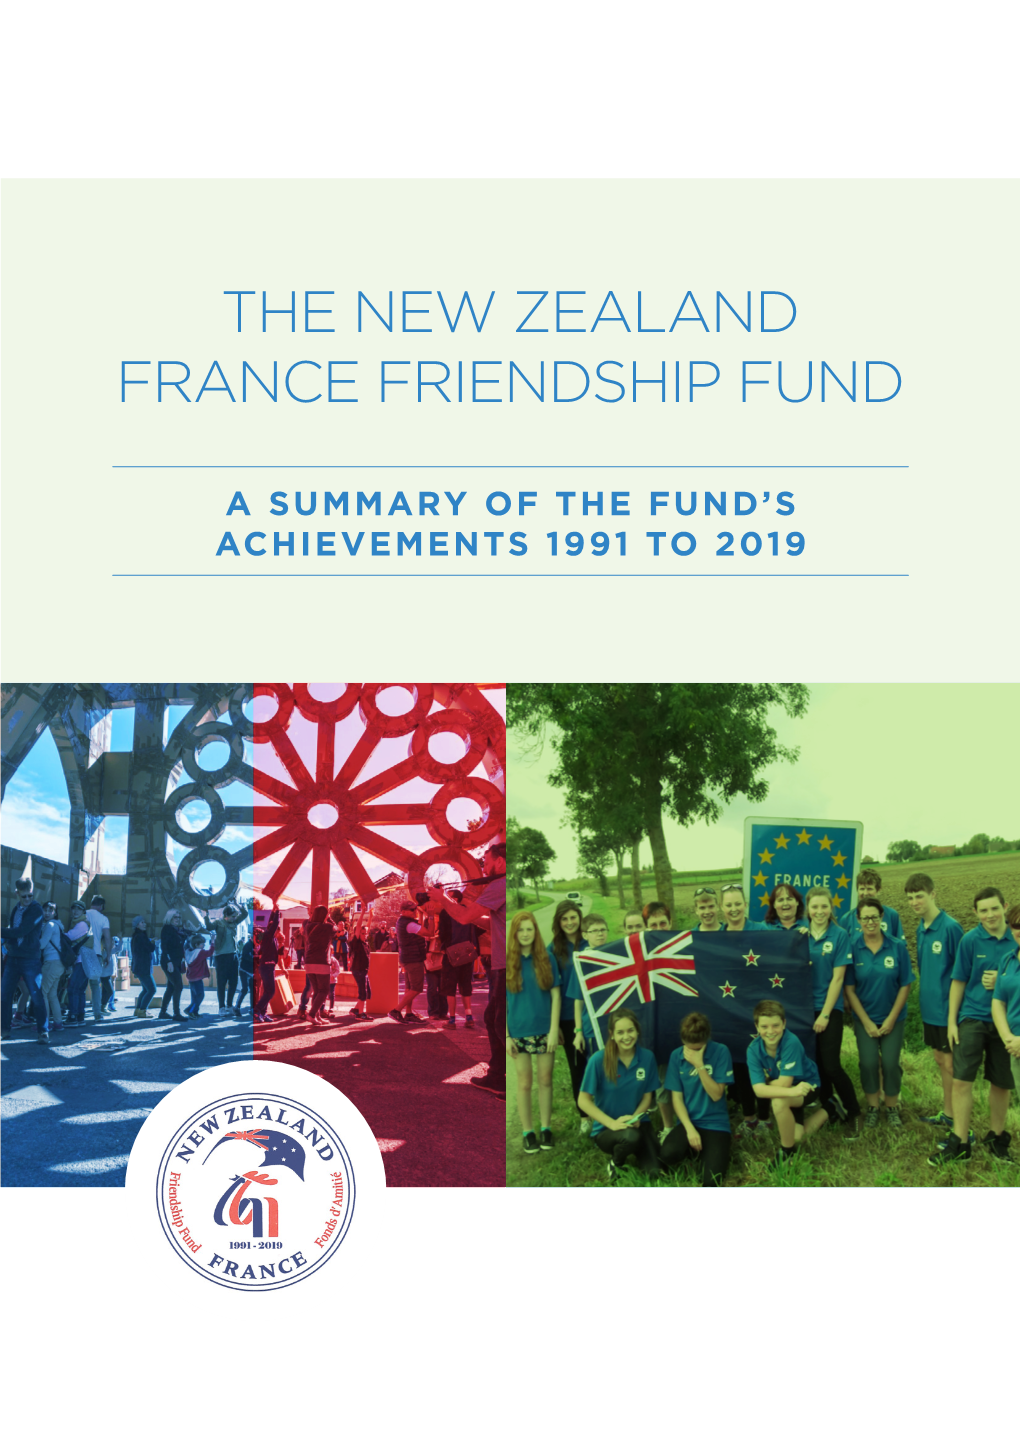 The New Zealand France Friendship Fund